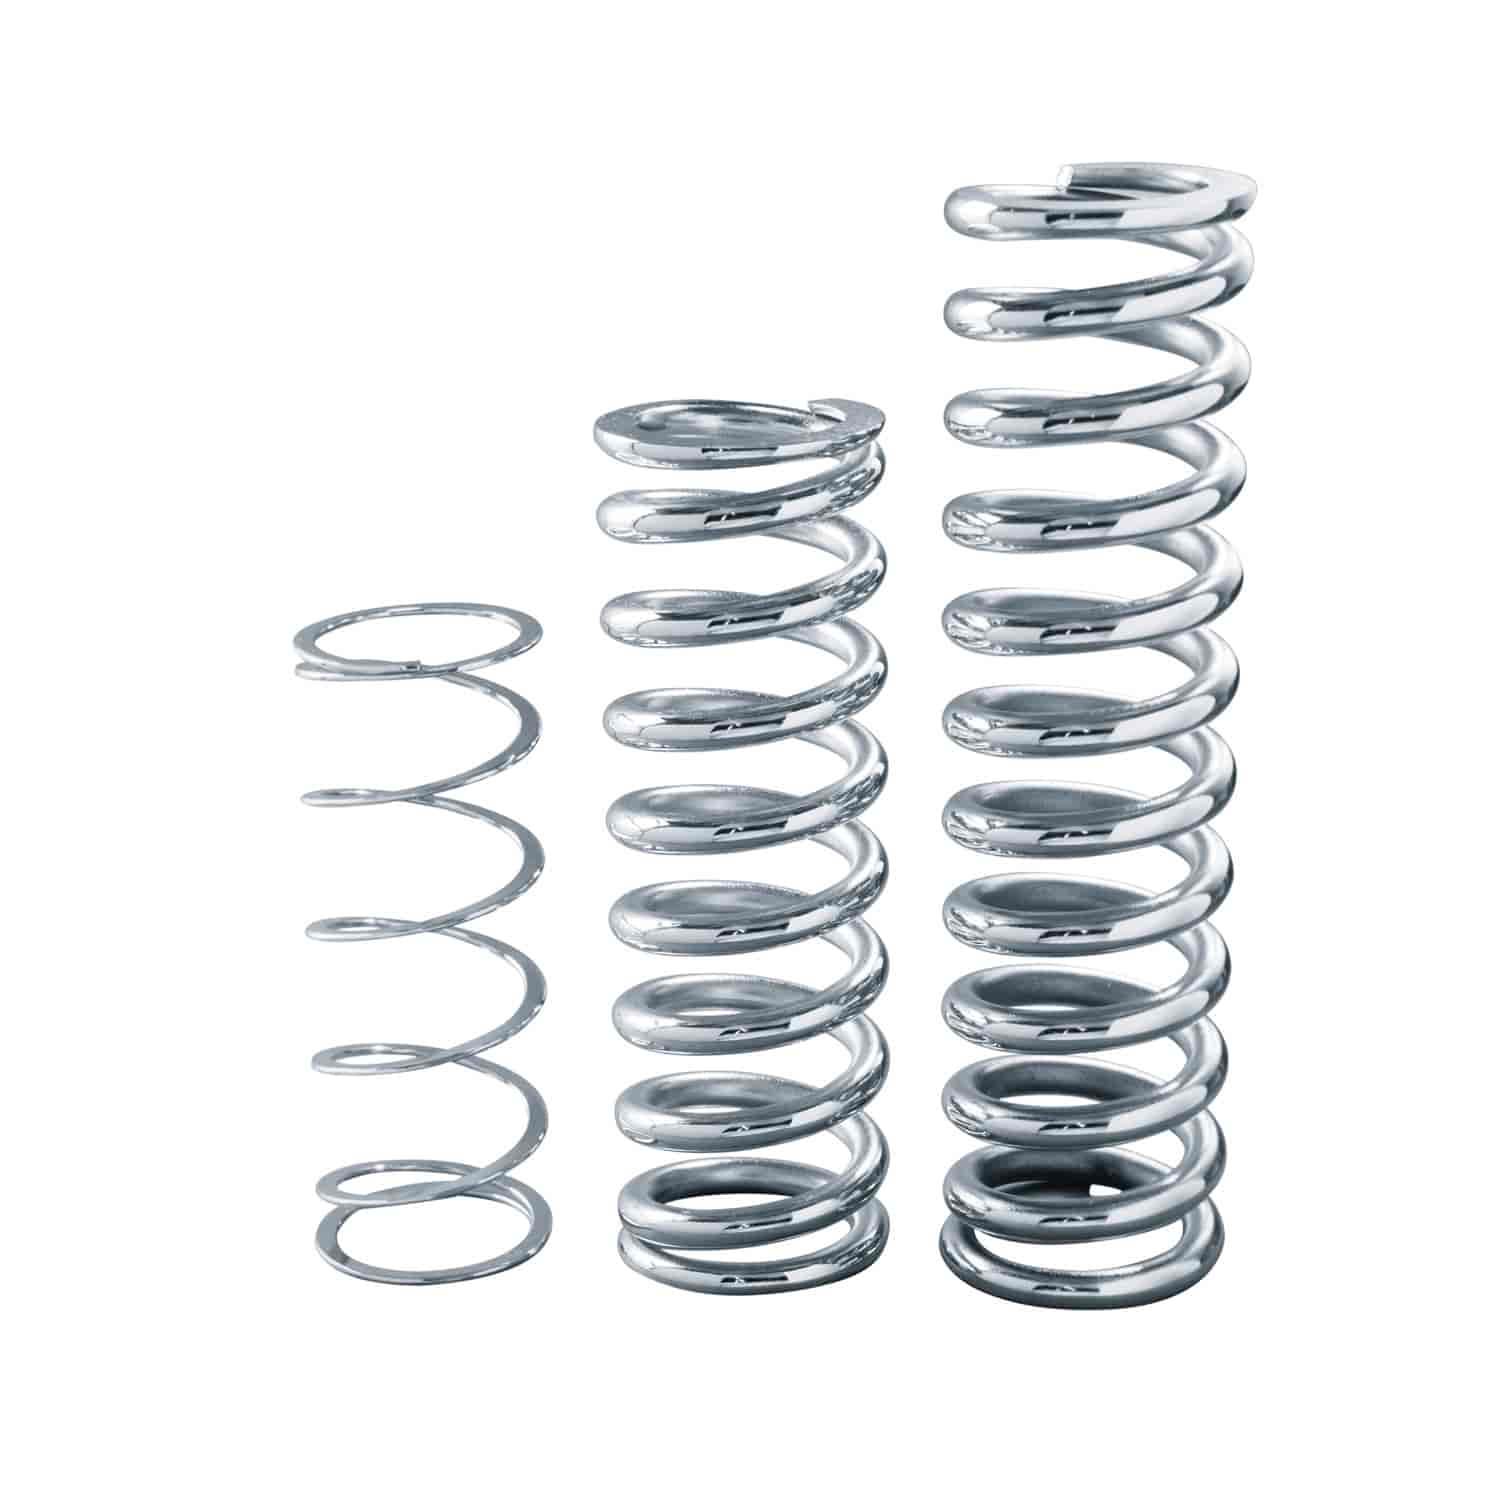 8" Polished Chrome Coil Spring Rate: 400 lbs